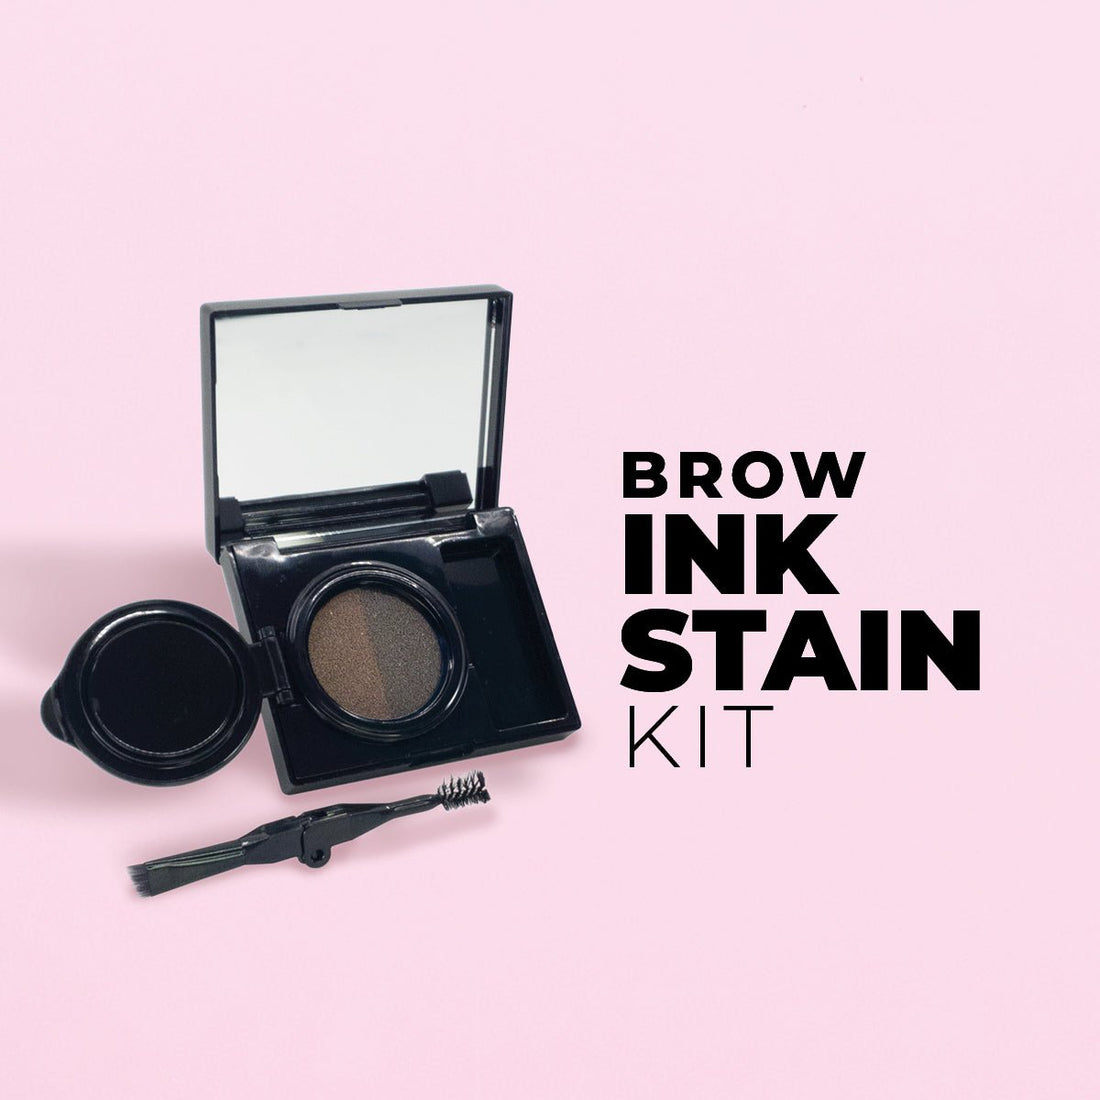 Brow Ink Stain Kit Skin Care OneVSalon   